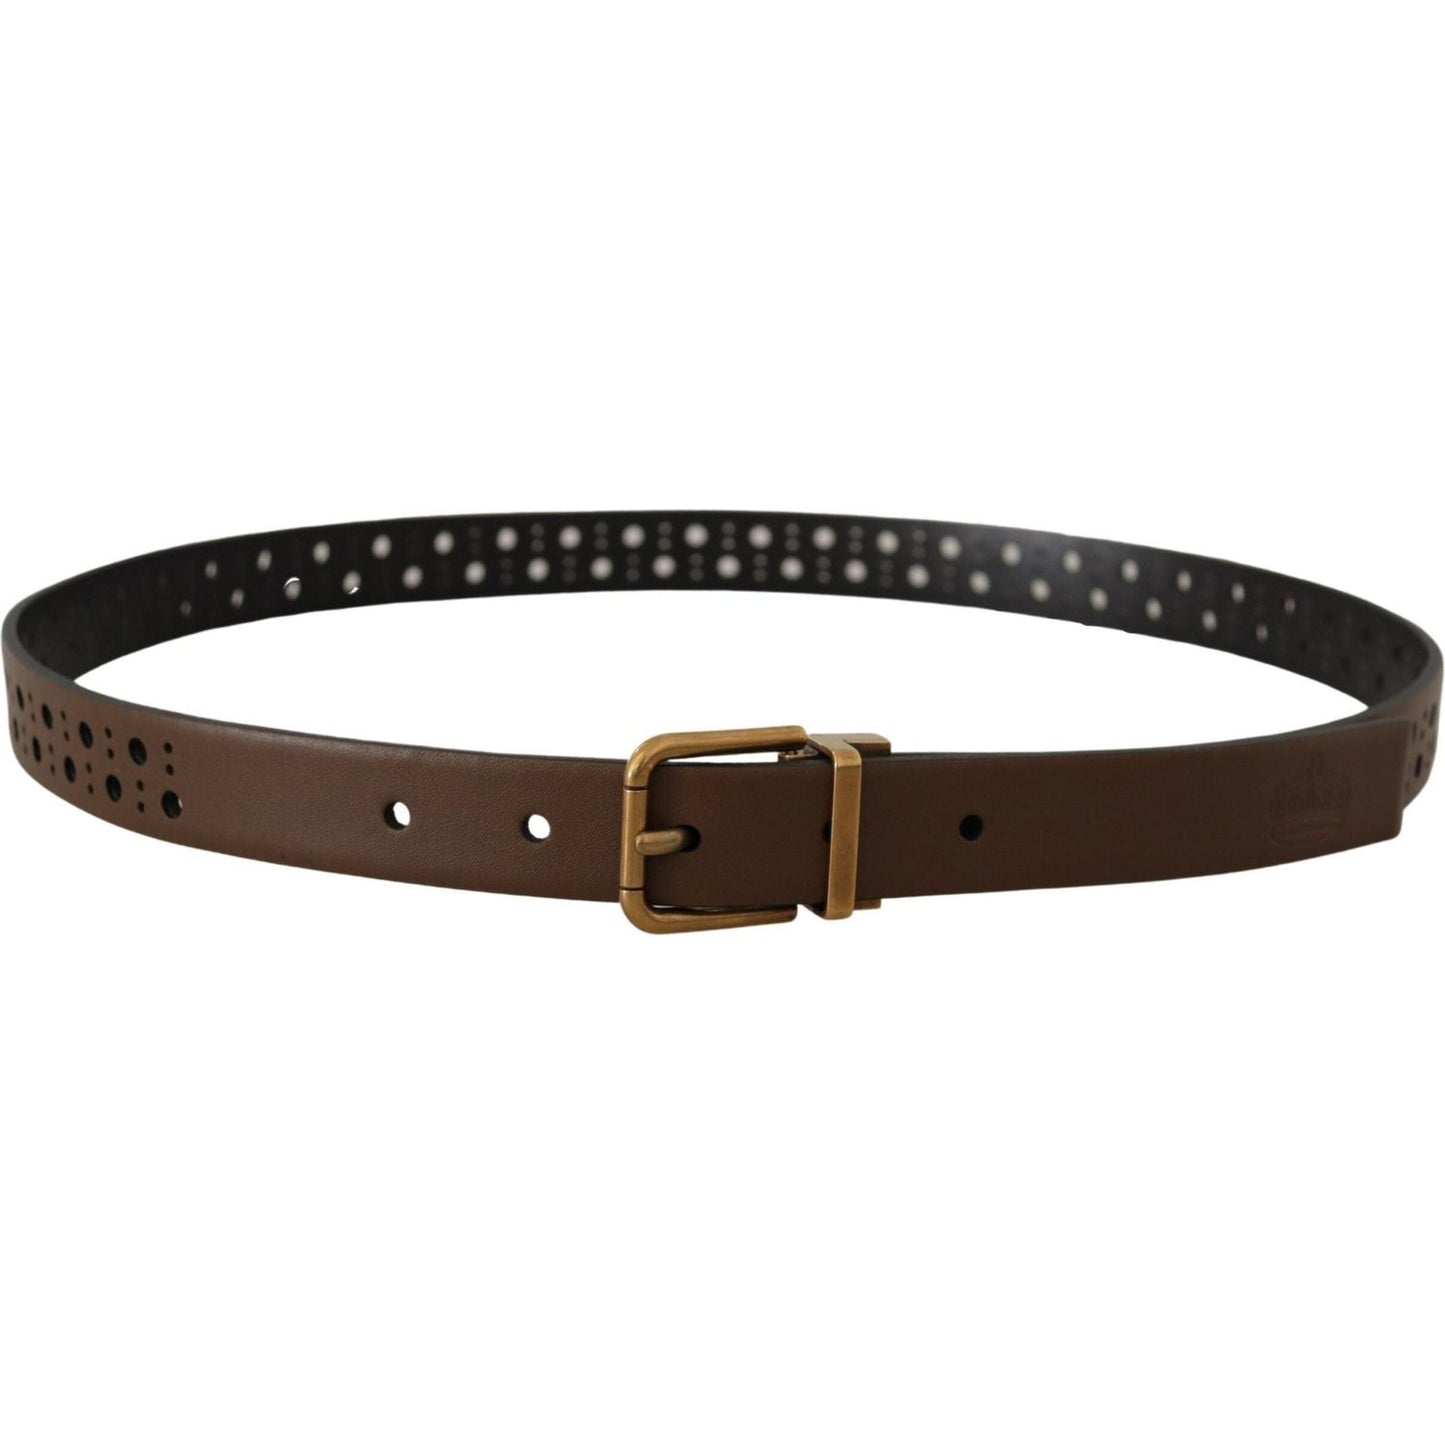 Dolce & Gabbana Elegant Brown Leather Belt with Golden Buckle brown-leather-perforated-crown-belt